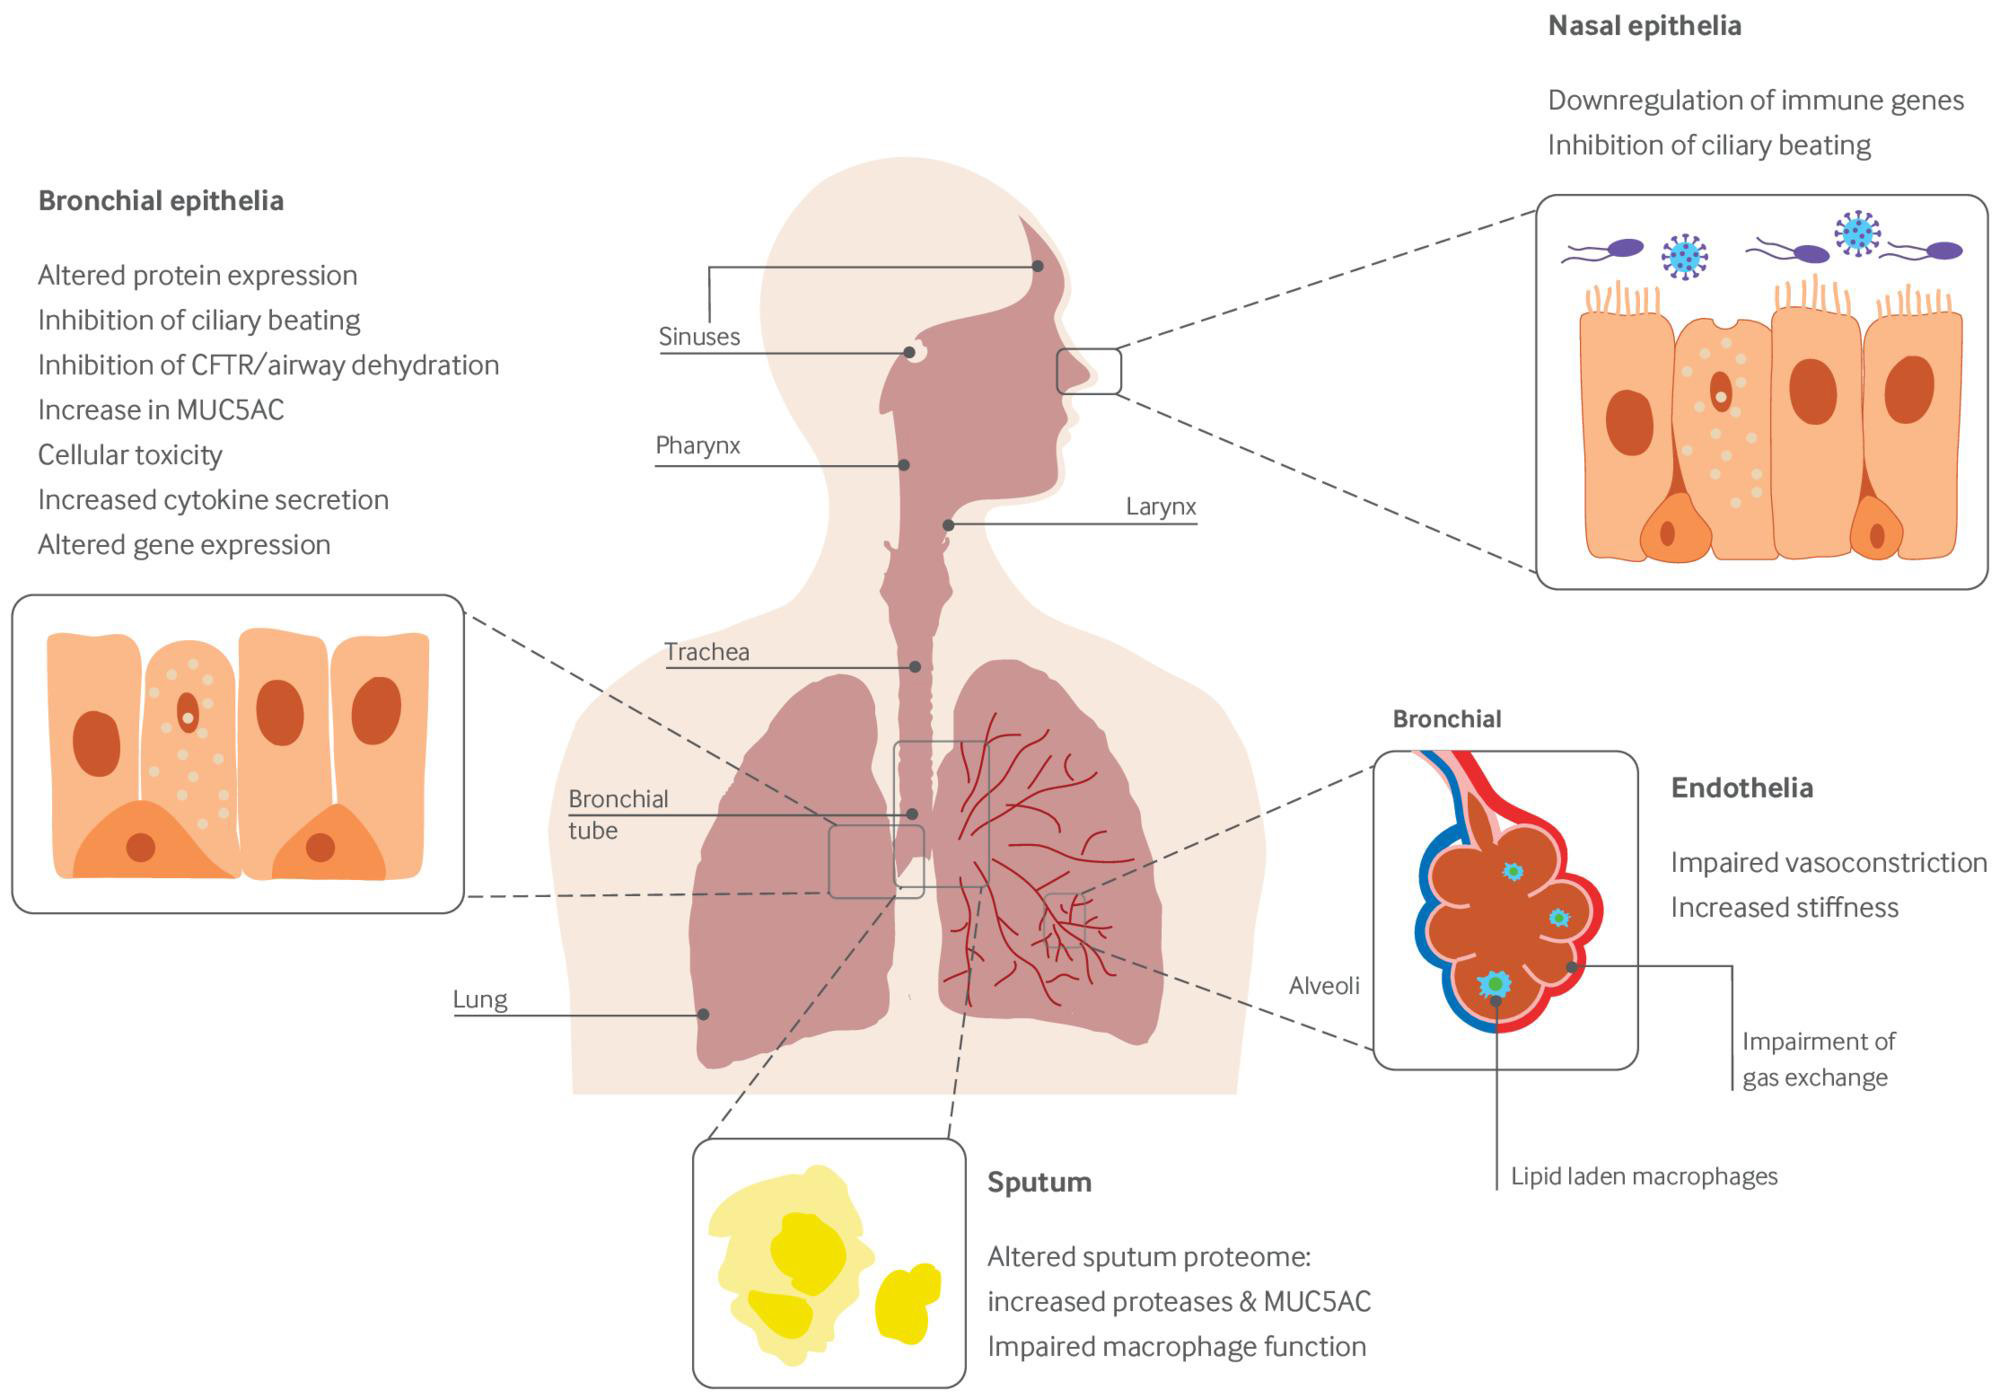 graphic of vaping’s widespread effects on the respiratory system